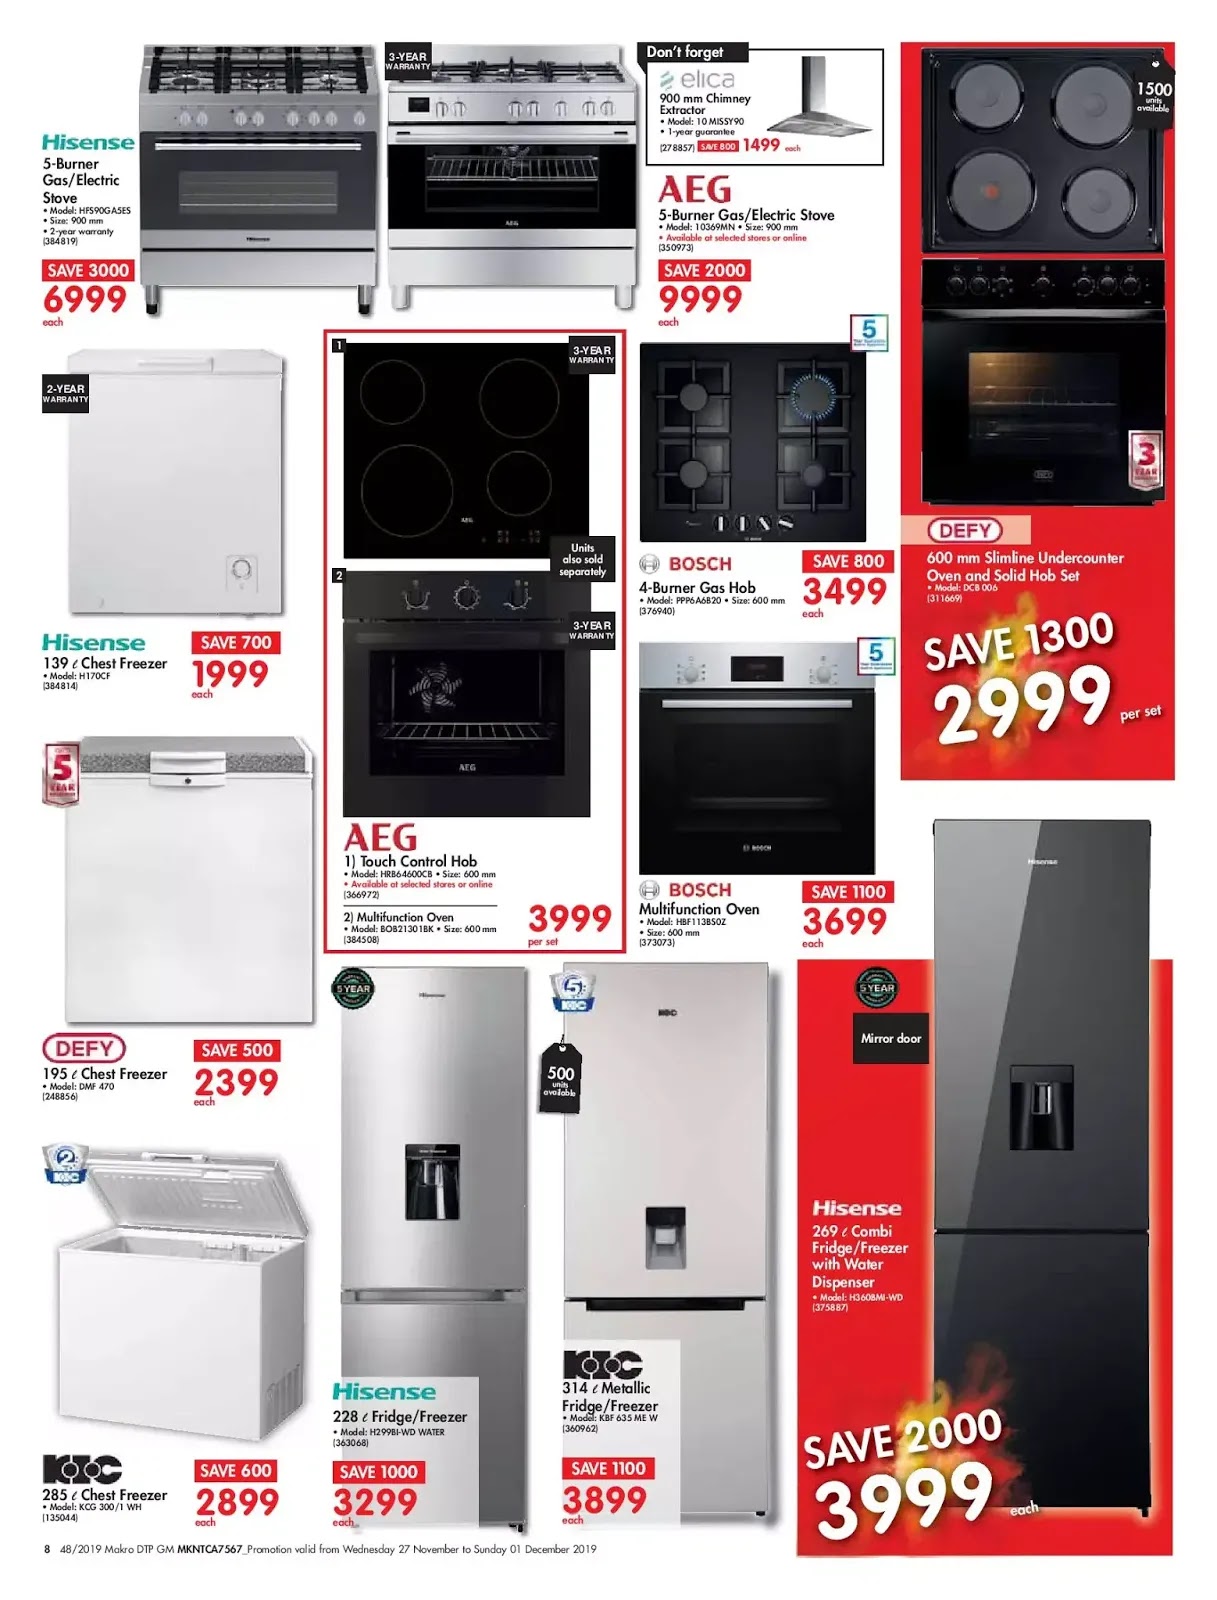 [Updated 2019] Makro Black Friday 5 Deals Revealed (up to 80% OFF)